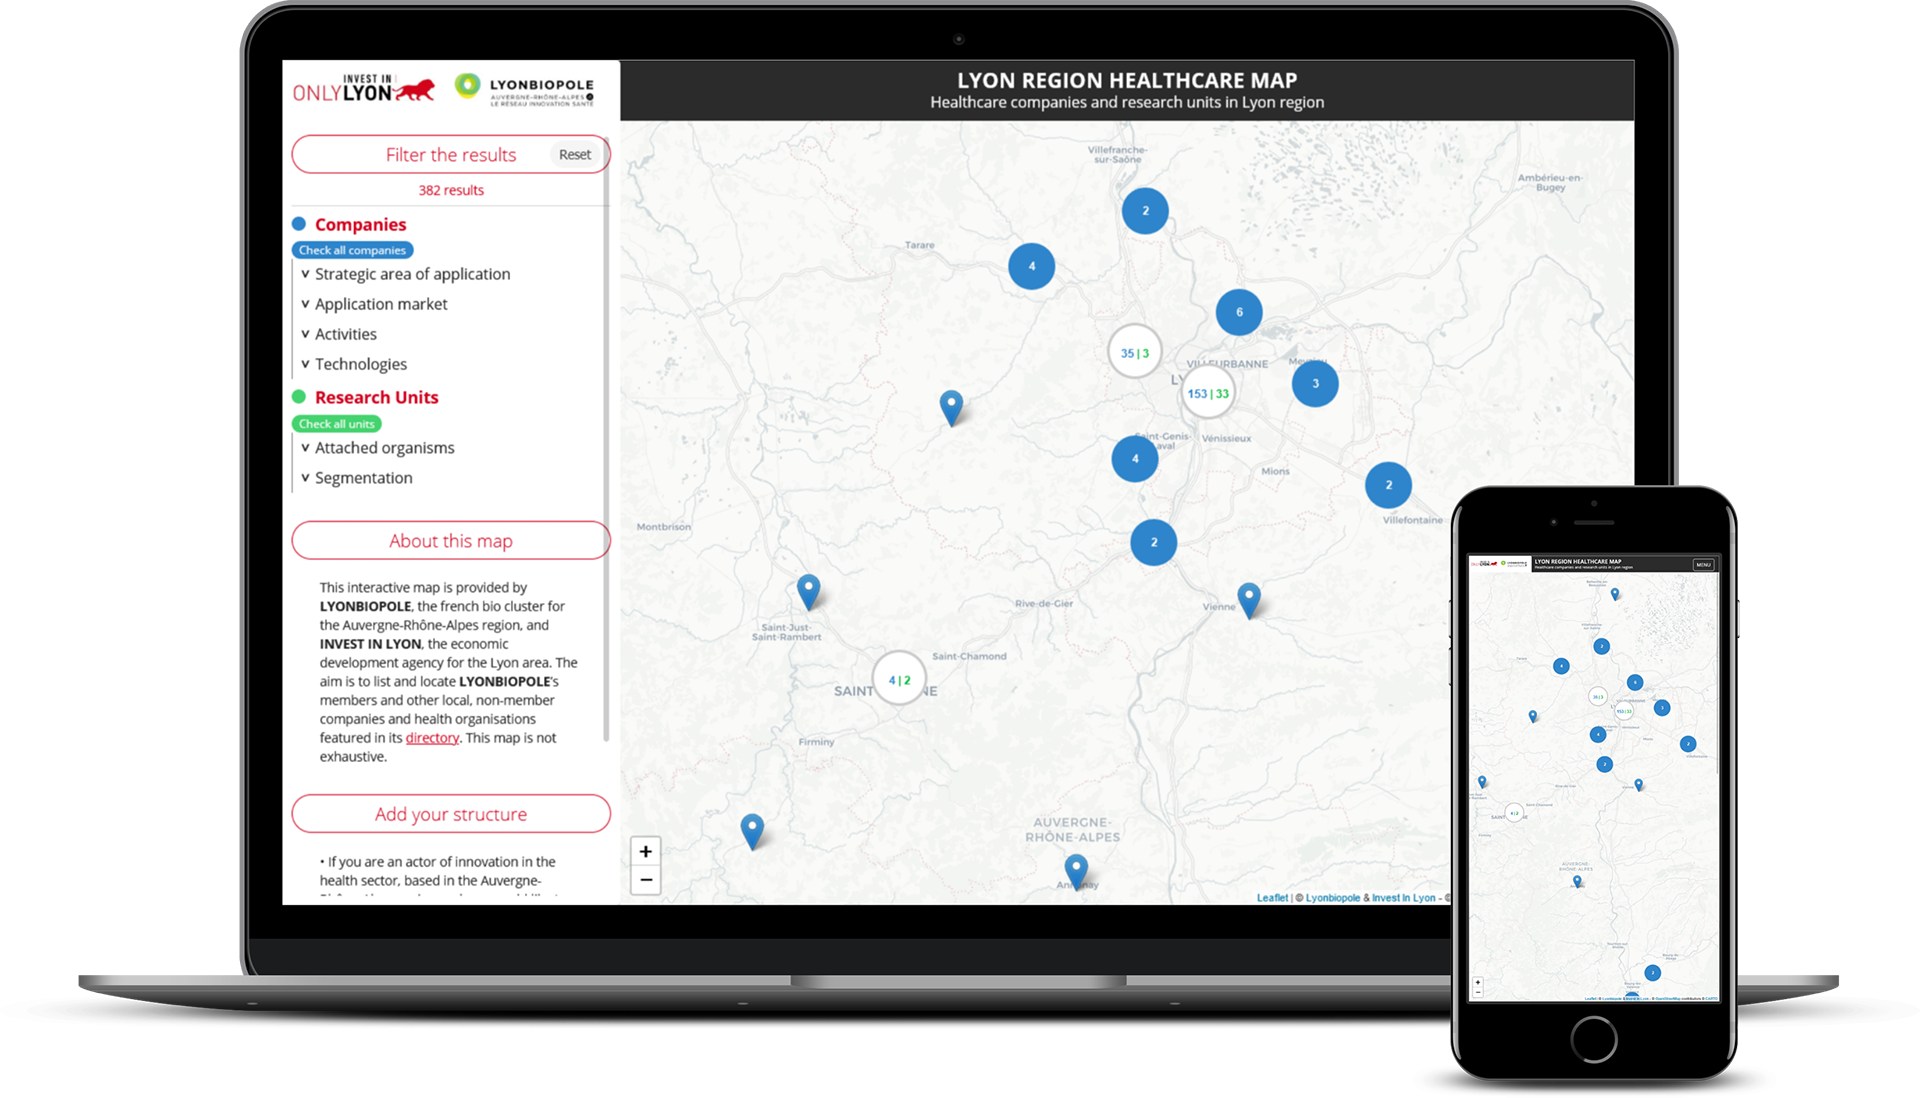 onlylyonhealthcaremap.com, the interactive map of life sciences and healthcare organisations in the Lyon area